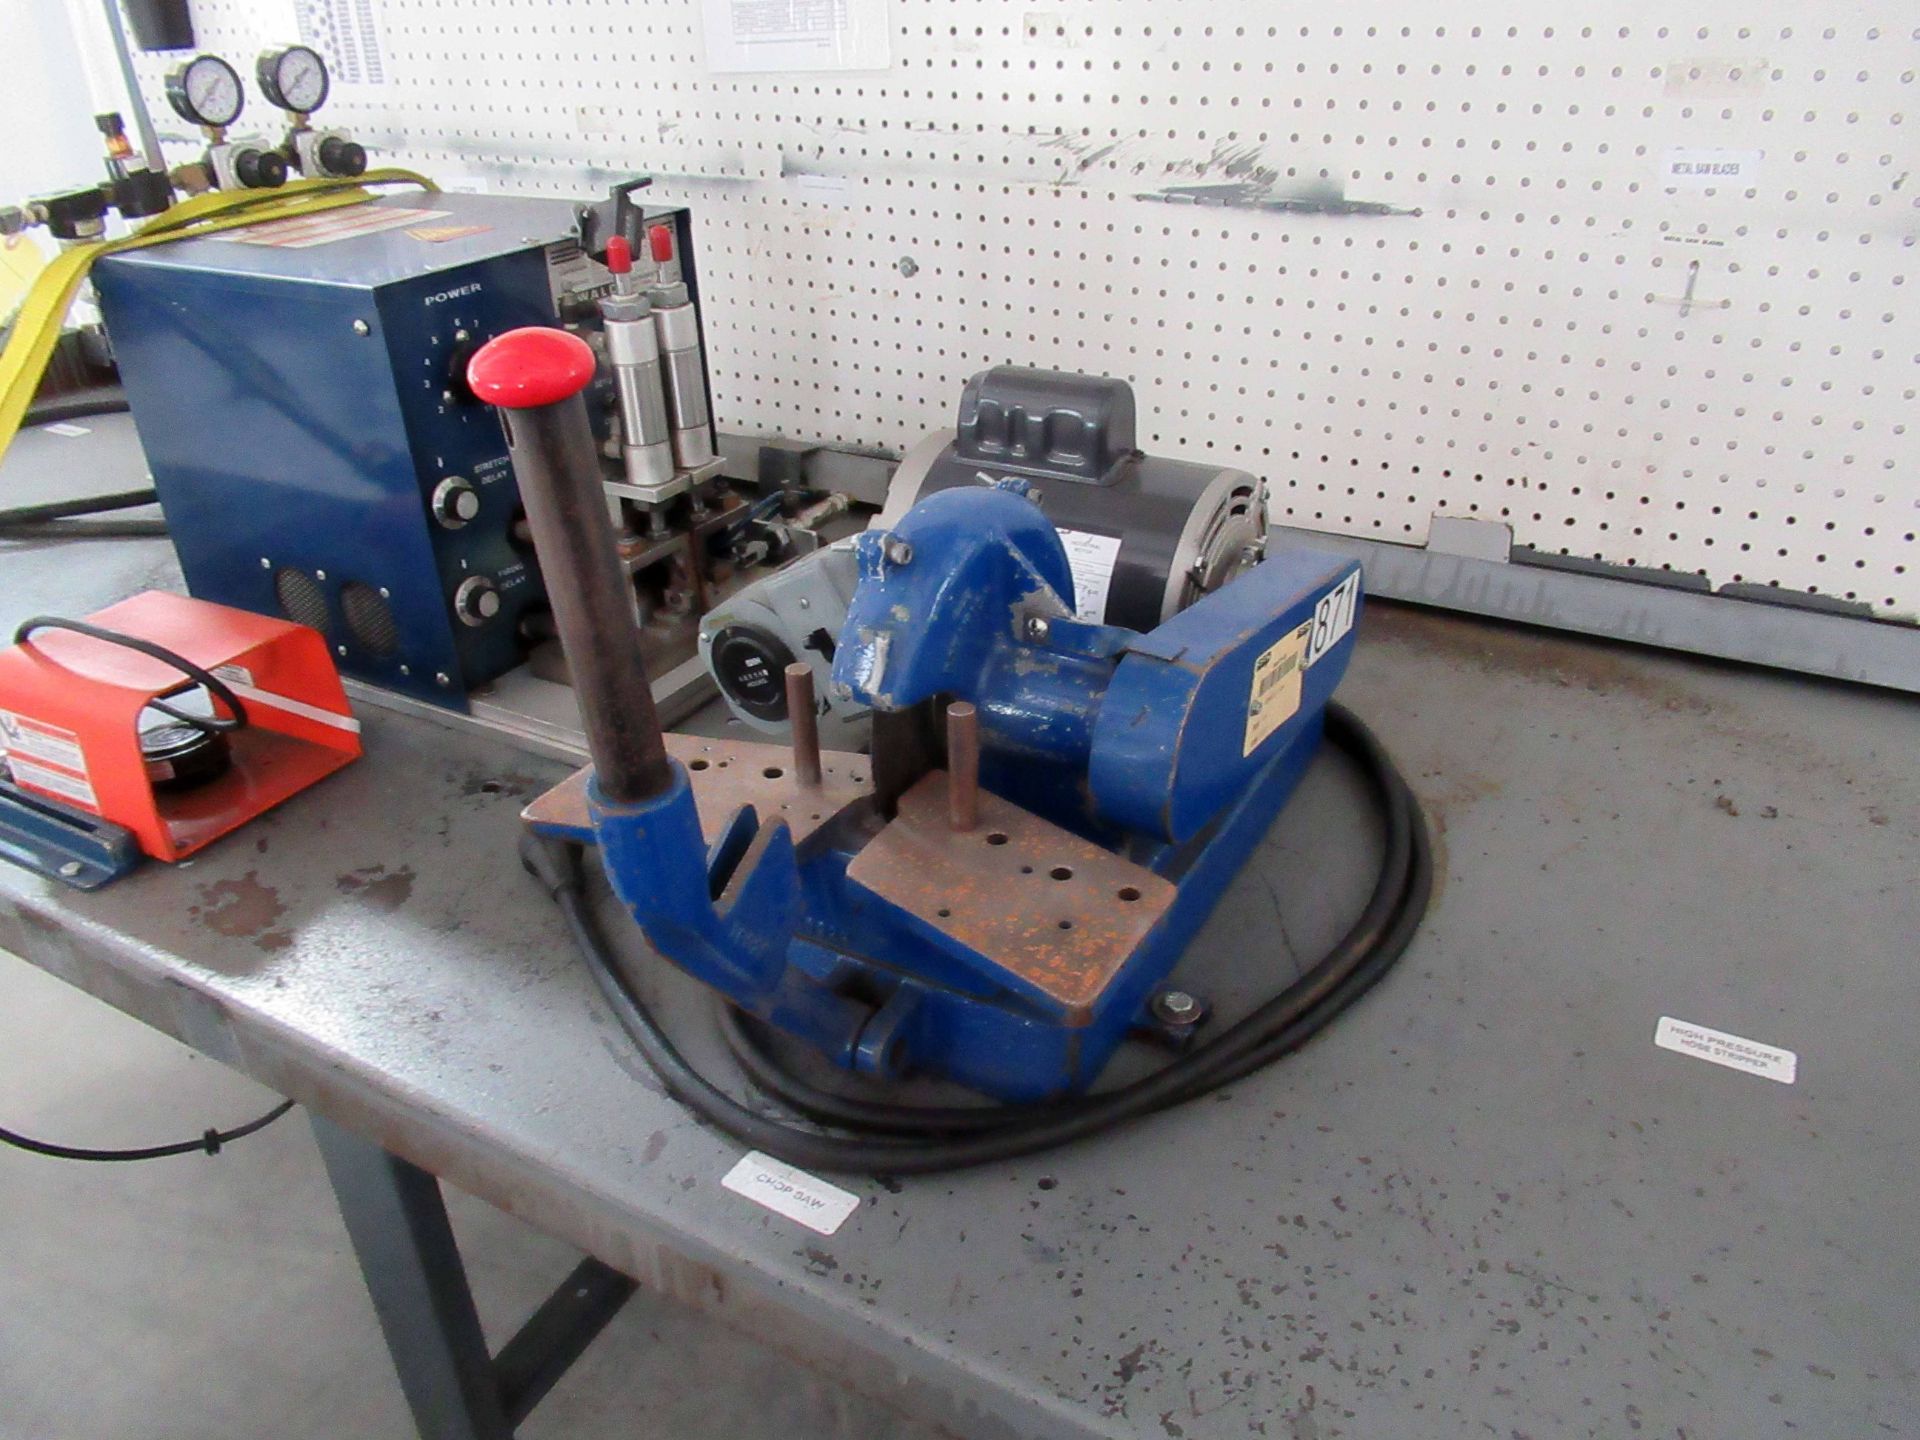 HOSE FLASH CUTTER STATION, EWALD FLASH CUTTER SS48CS/5 TUBE, Olympia 1410 wire length meter, 1 HP - Image 5 of 8